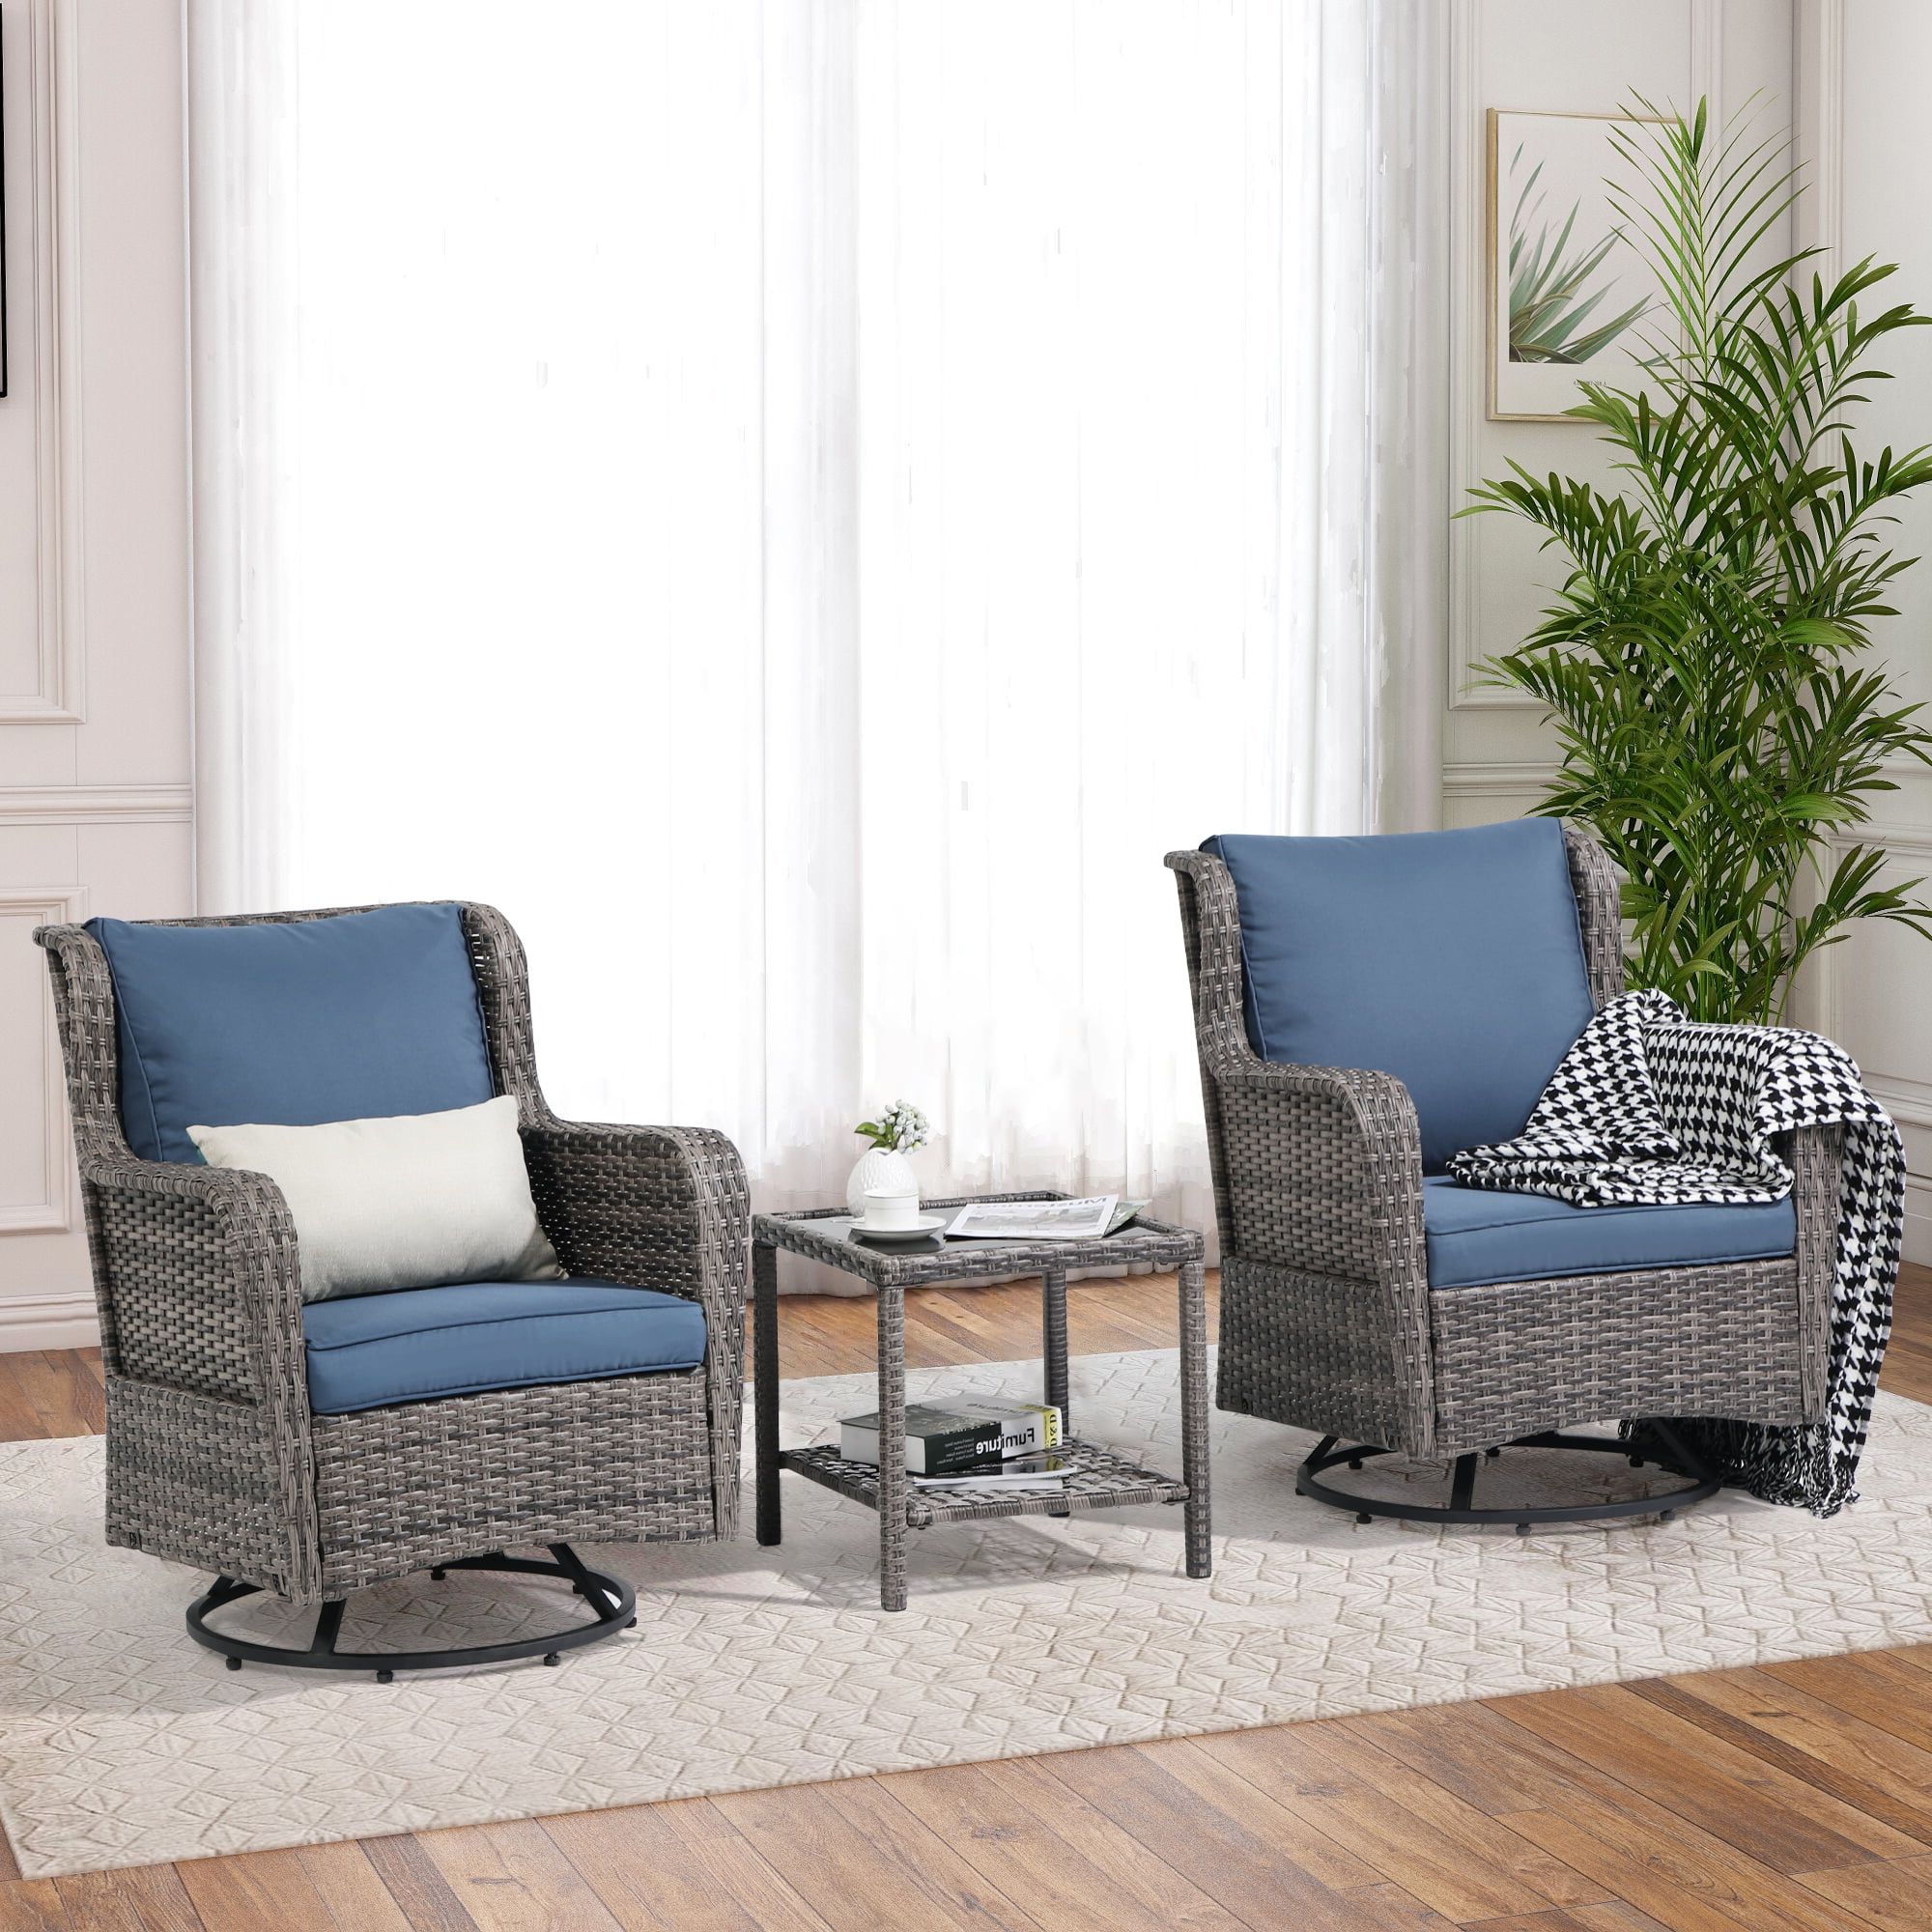 Joivi Patio Swivel Rocker Set, Outdoor Wicker Swivel Rocking Chairs With Side  Table, 3 Pieces All Weather Rattan Furniture Bistro Set With Thick  Cushions, Iron Frame, Navy Blue – Walmart With Most Recent Side Table Iron Frame Patio Furniture Set (View 6 of 15)